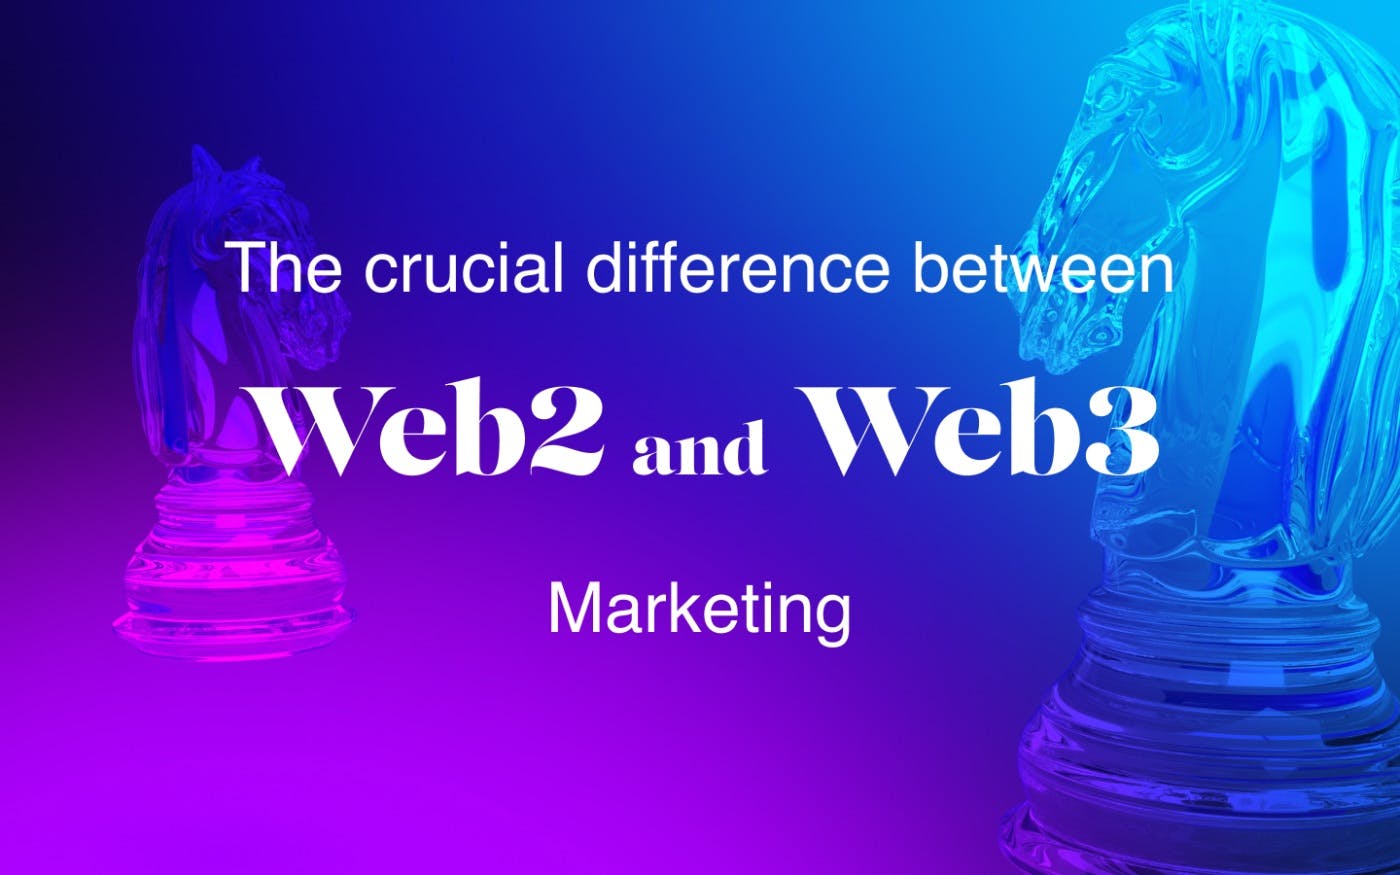 featured image - The crucial difference between Web2 and Web3 Marketing